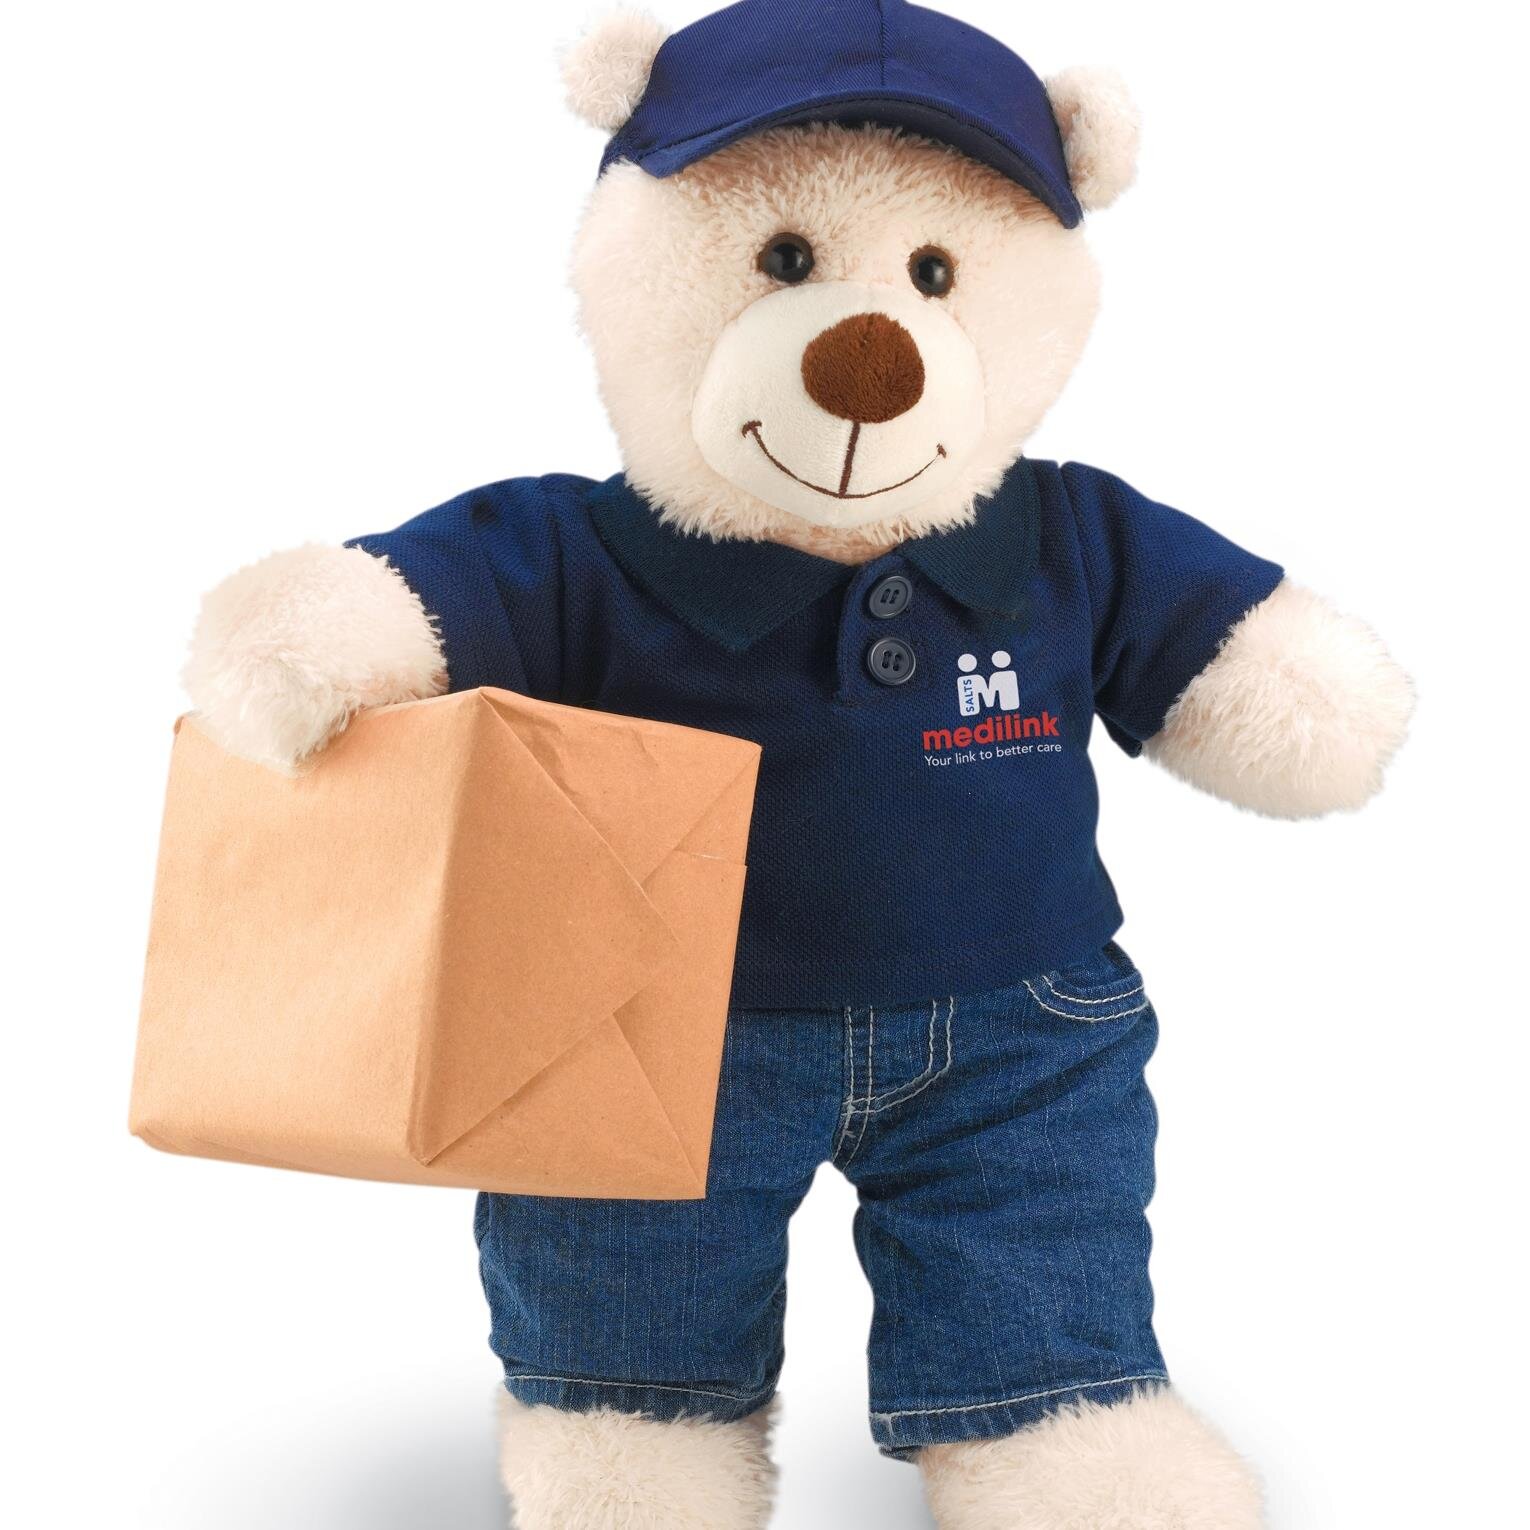 Medilink Paediatric Mascot To look after all children. Delivering a first class service everytime! With a smile!!